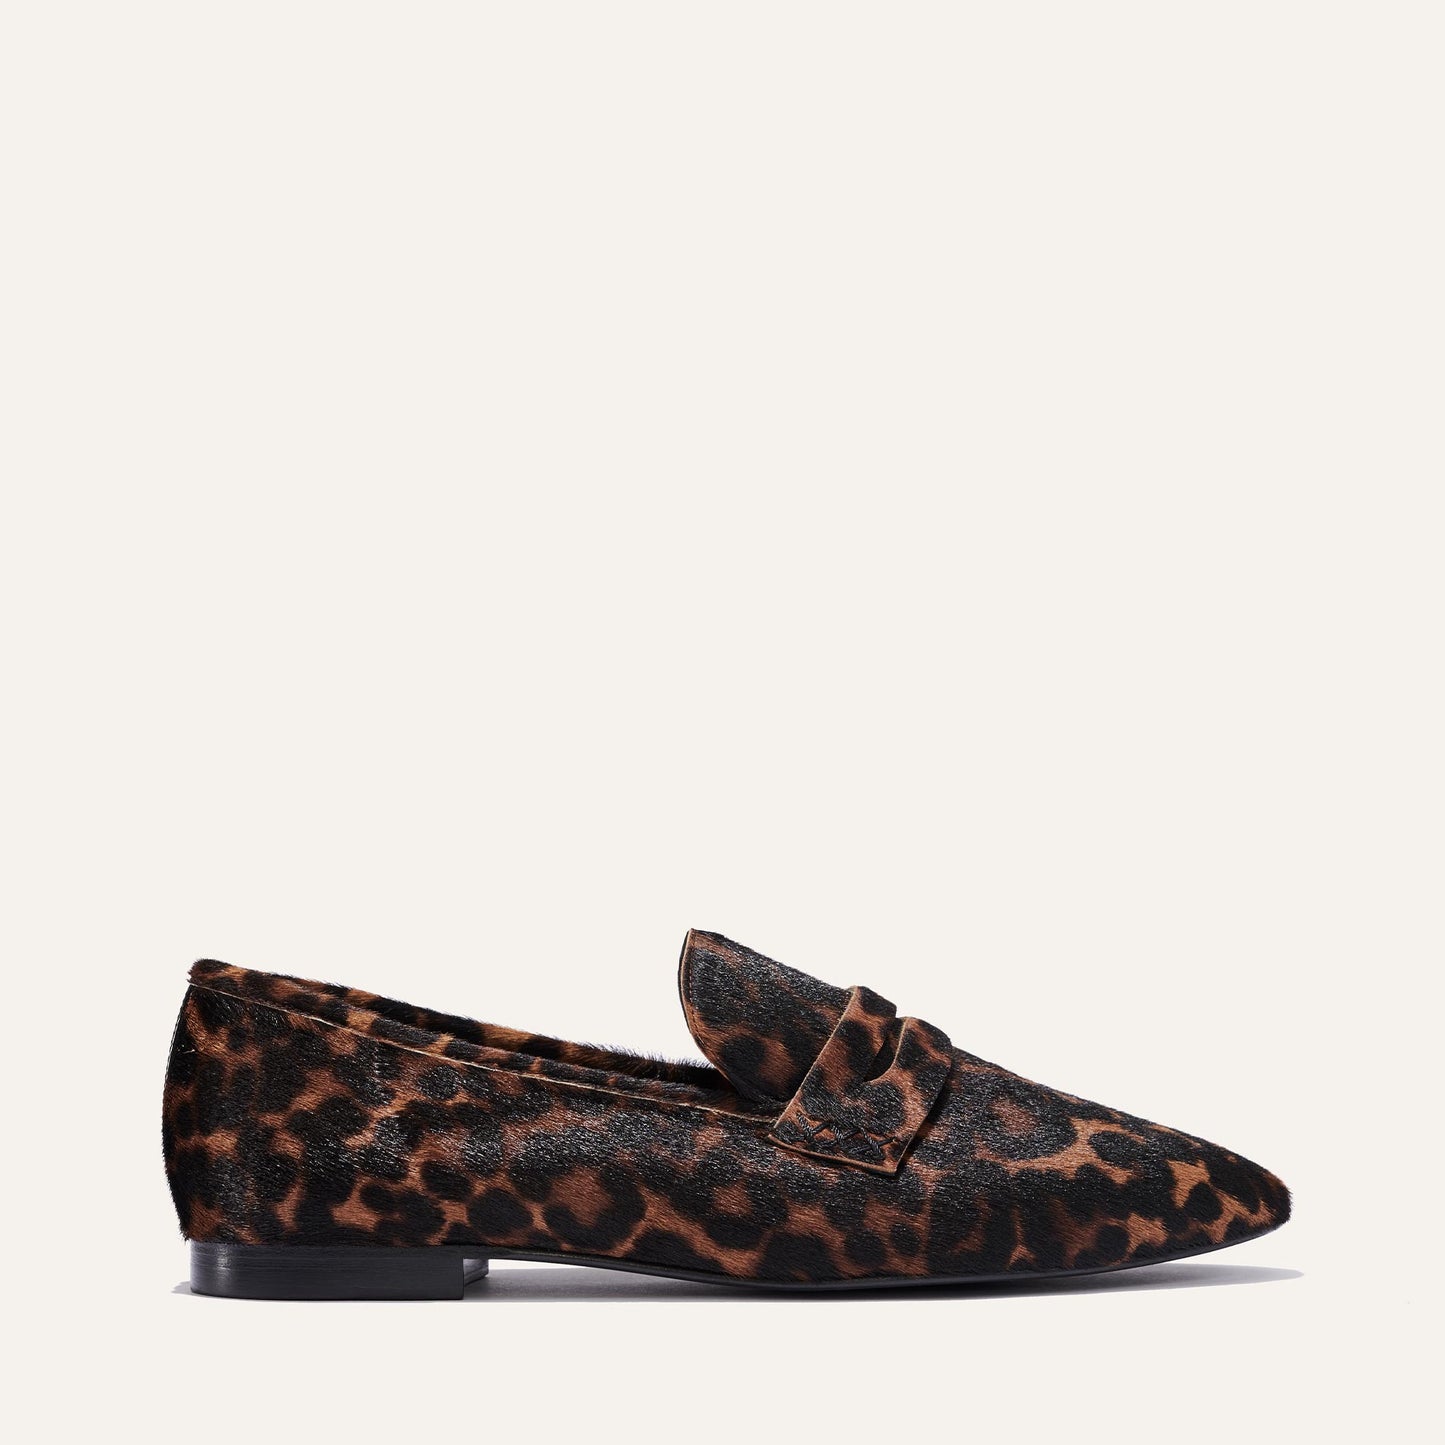 Margaux's classic and comfortable Penny loafer, made in a soft, chocolate leopard printed haircalf